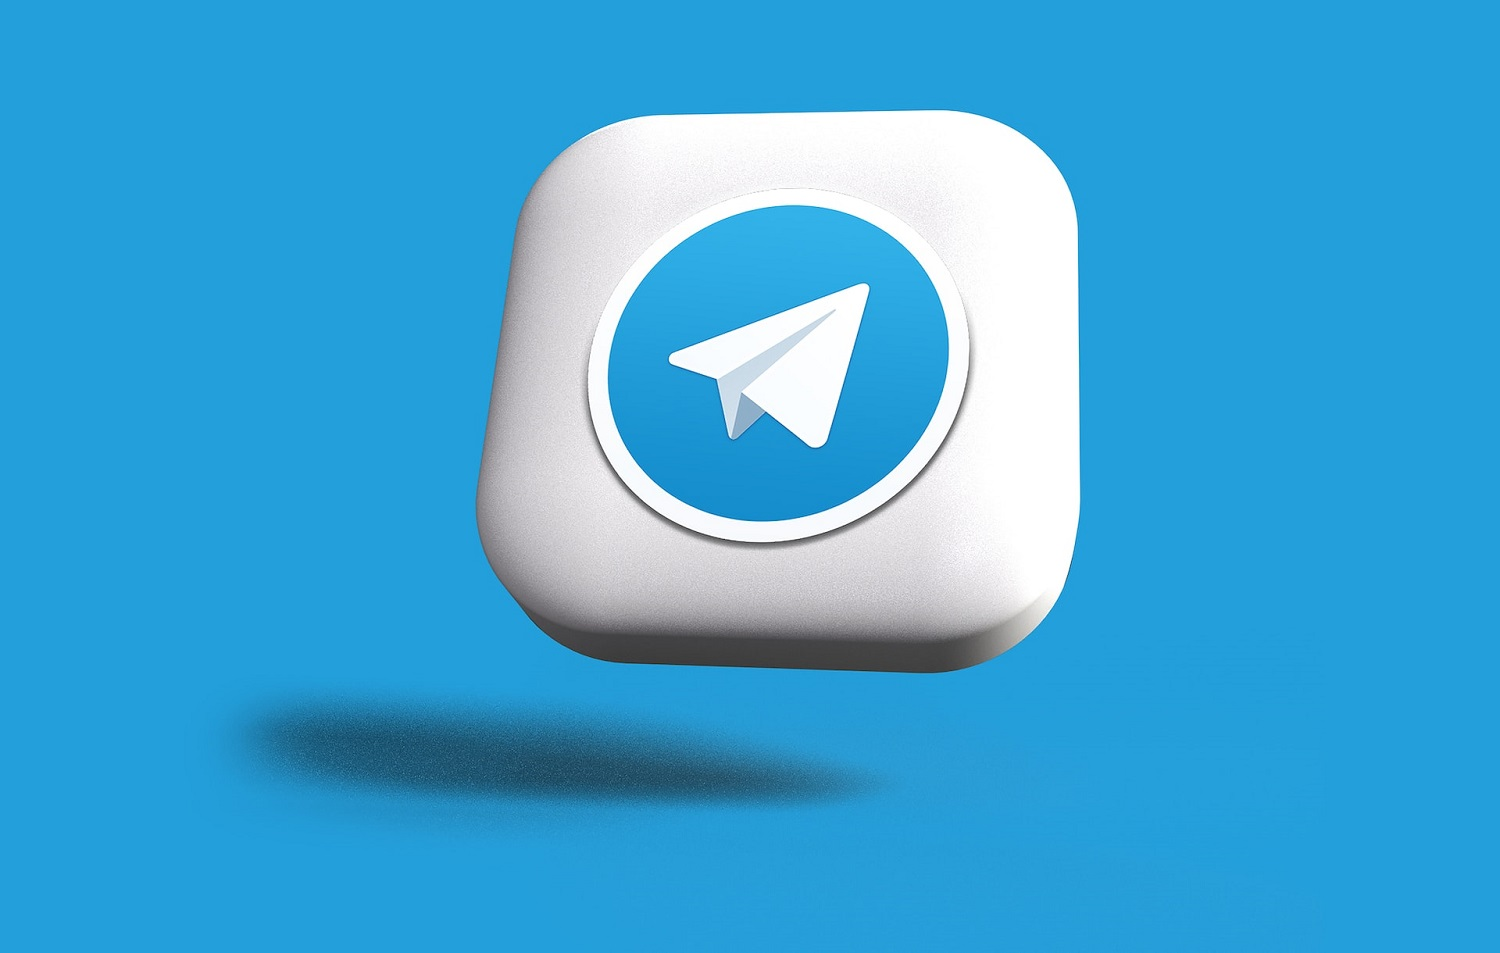 Telegram is more advanced than other messengers